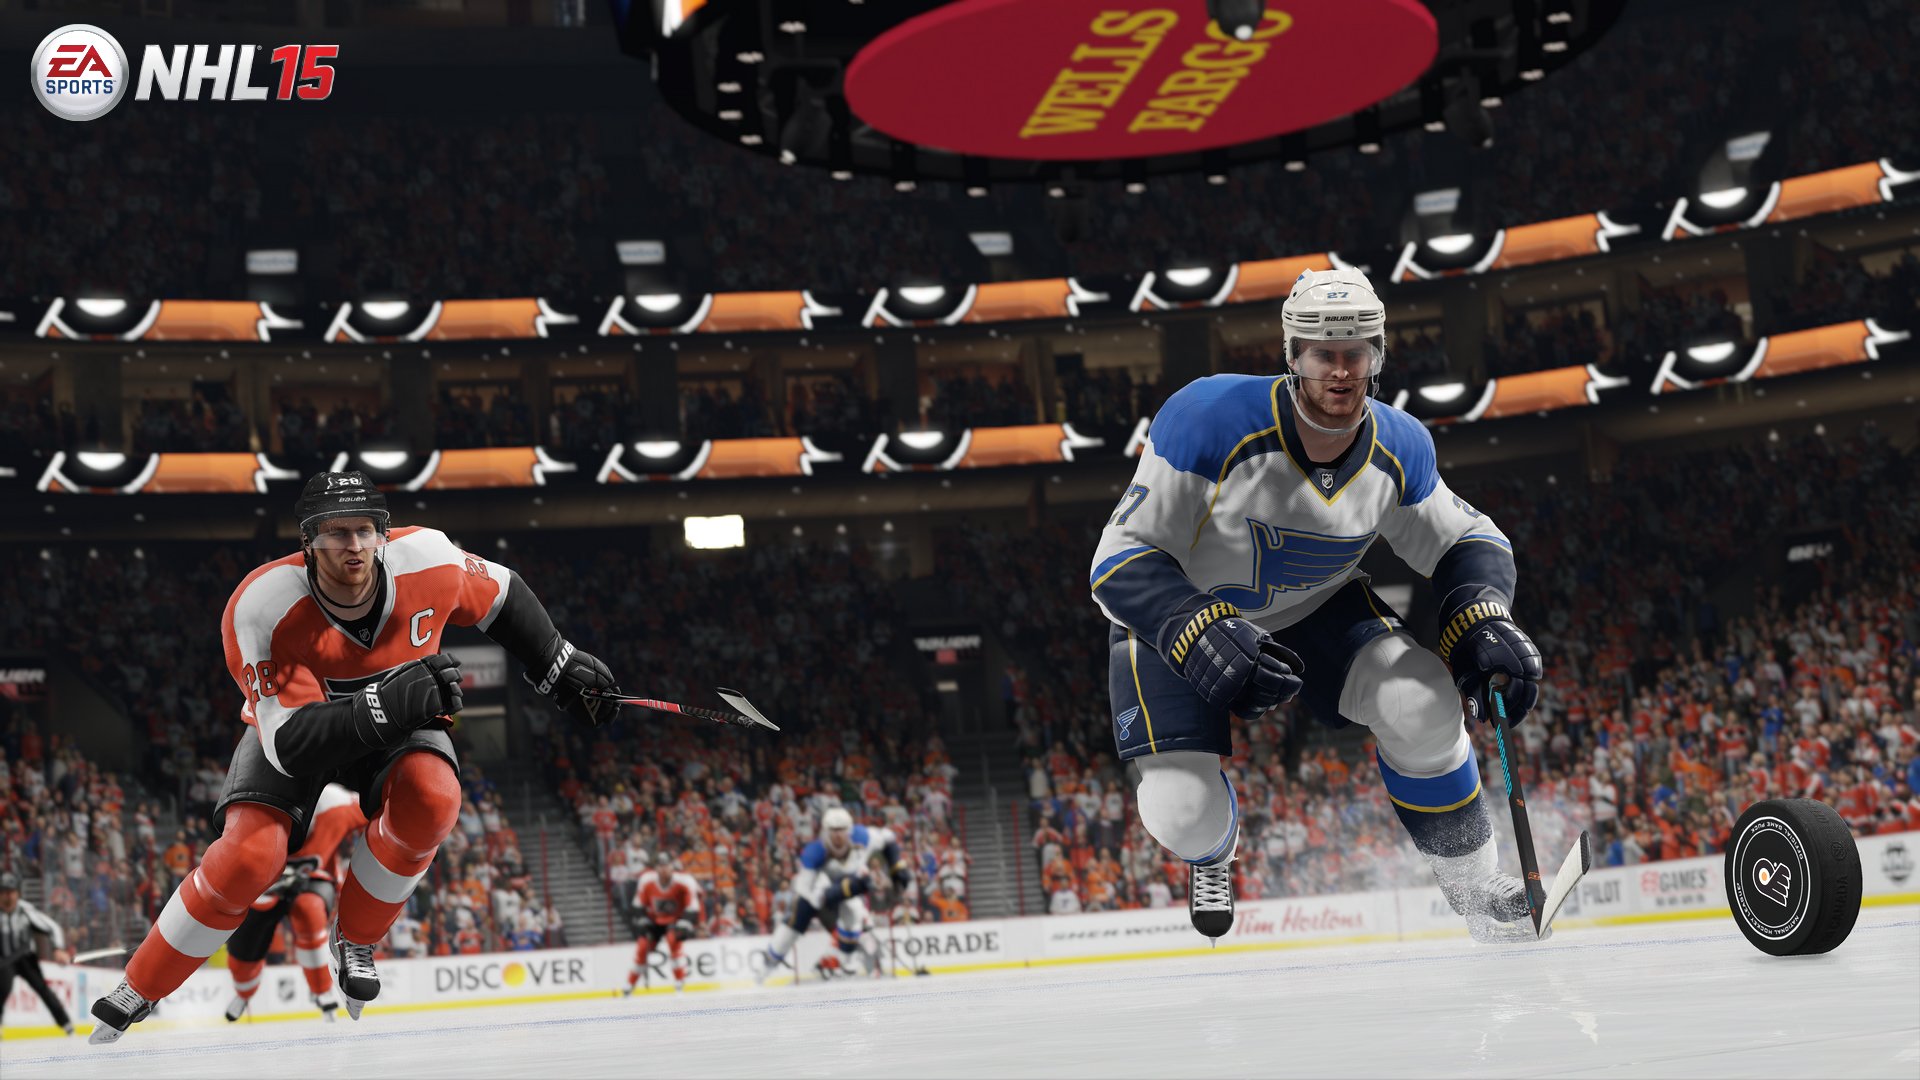 Check out three exciting NHL 15 features coming for the Xbox One and PS4.